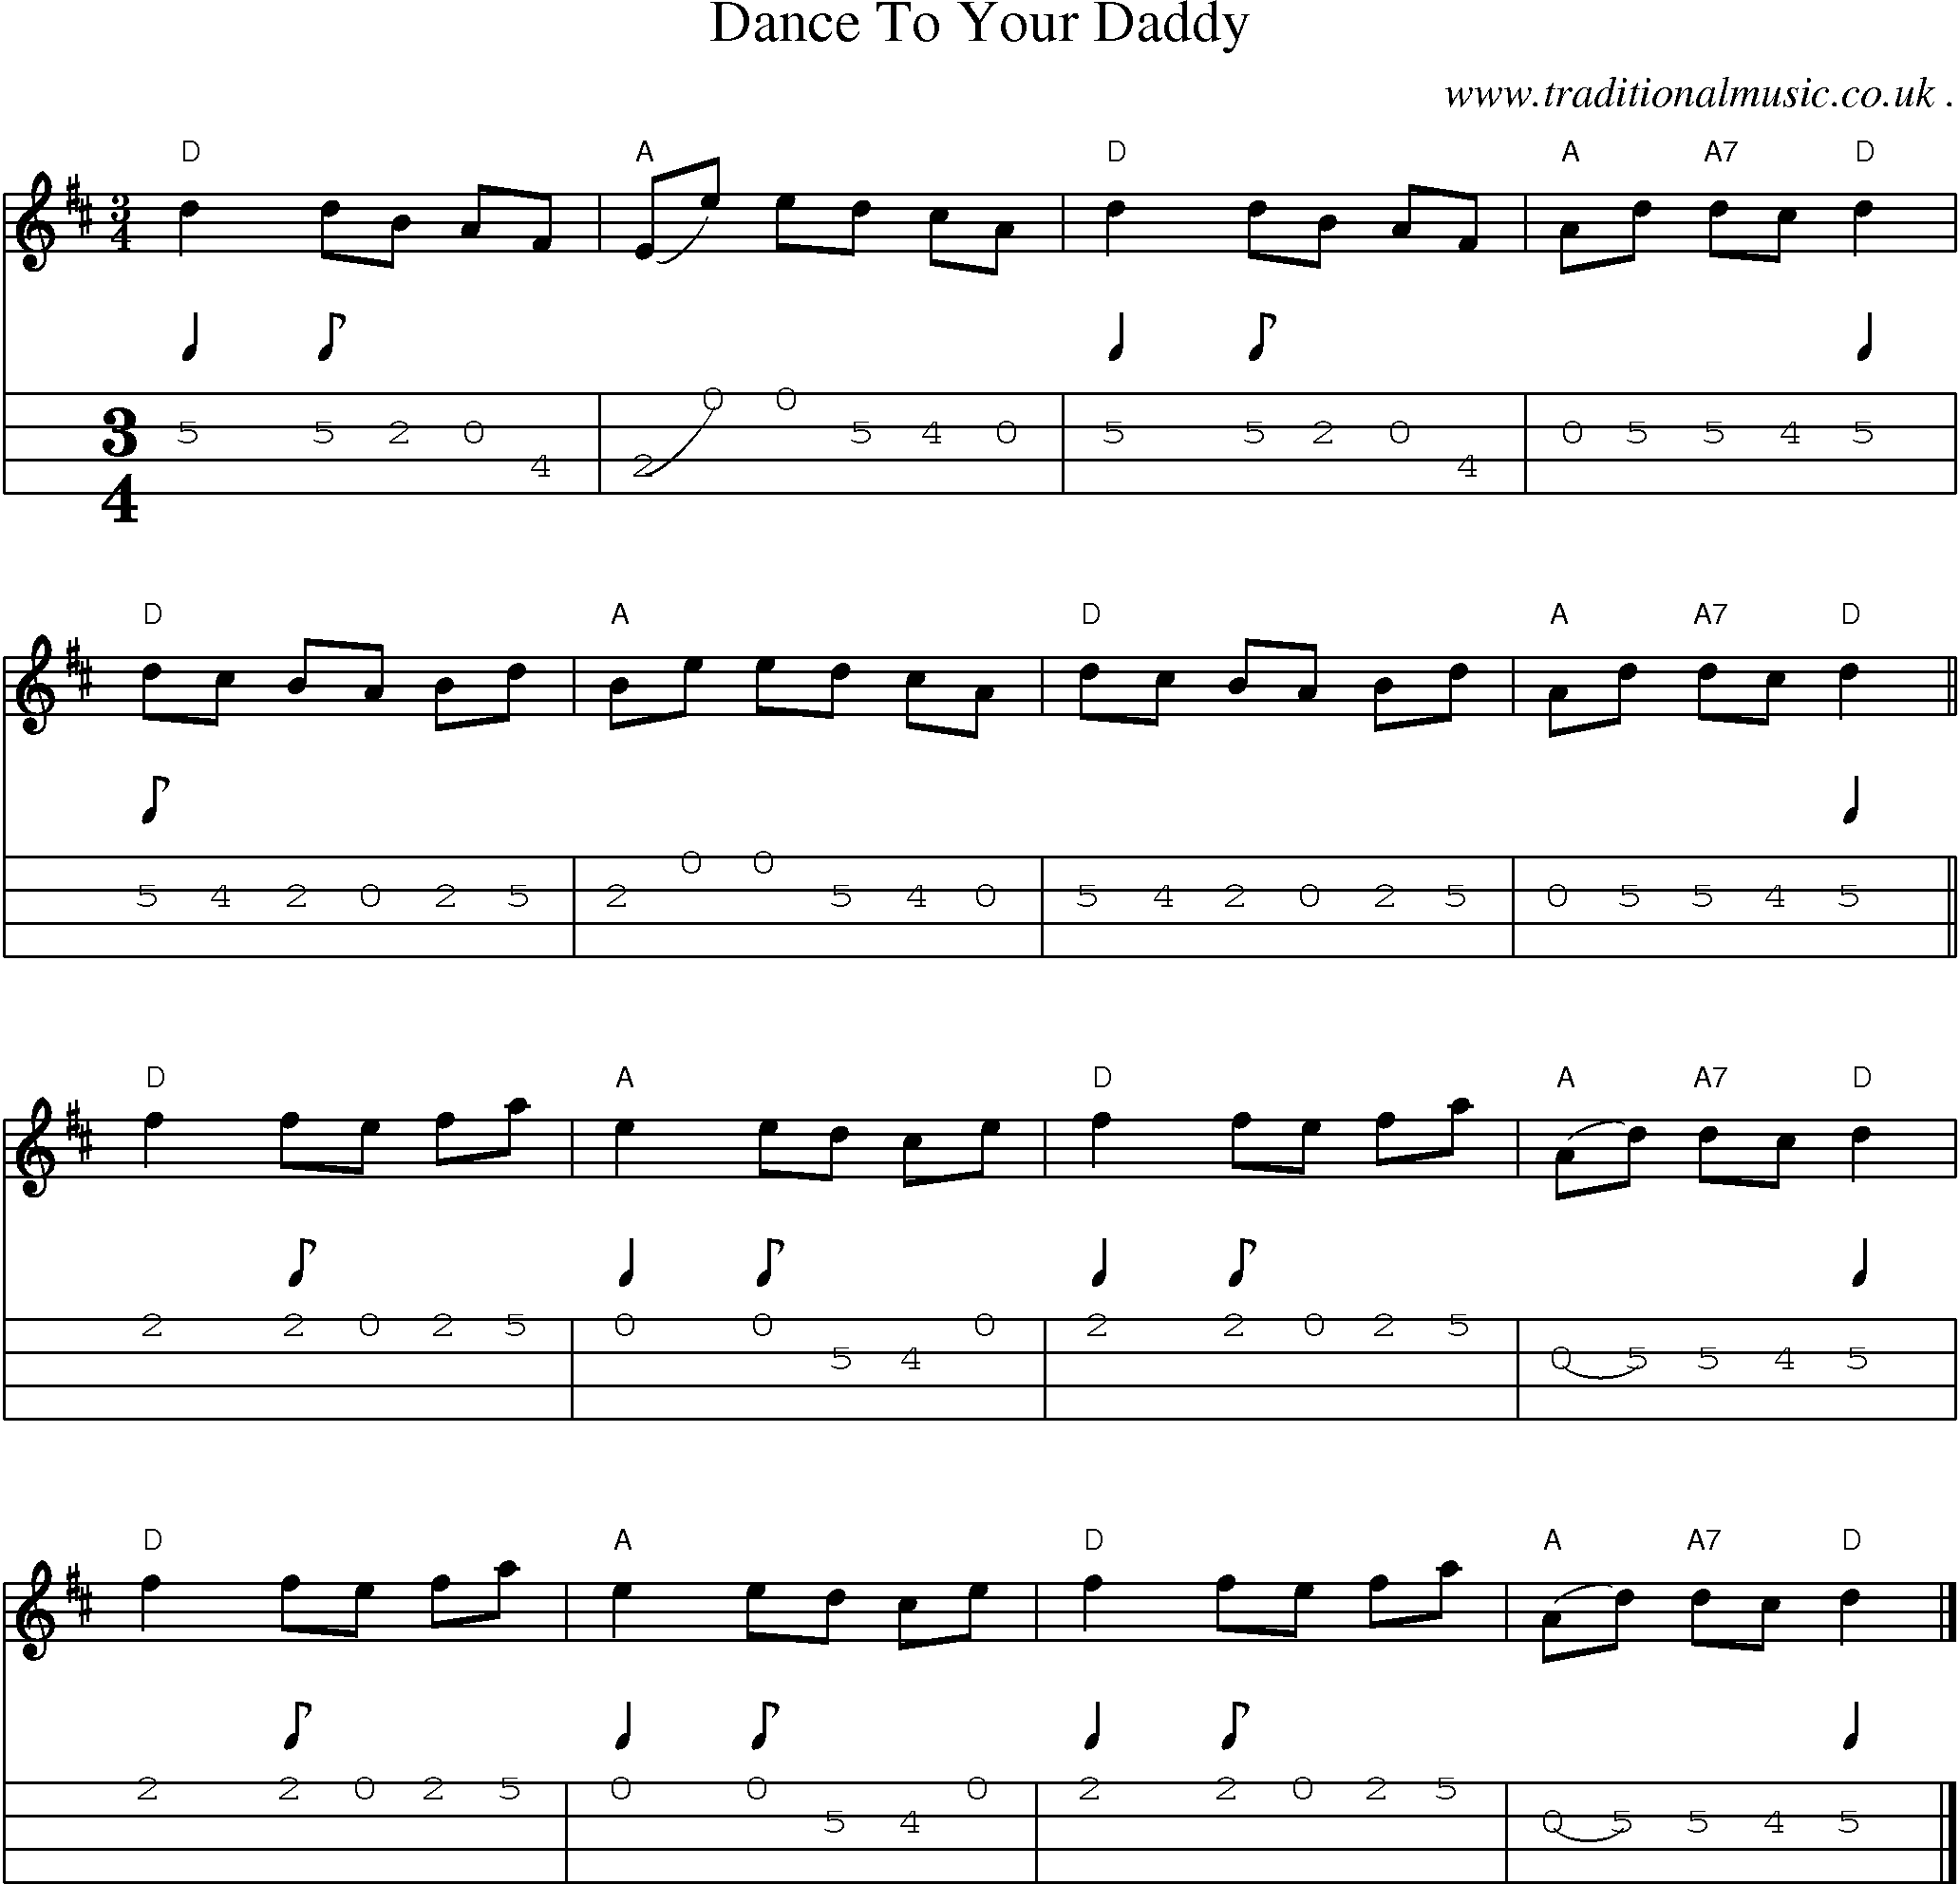 Music Score and Guitar Tabs for Dance To Your Daddy